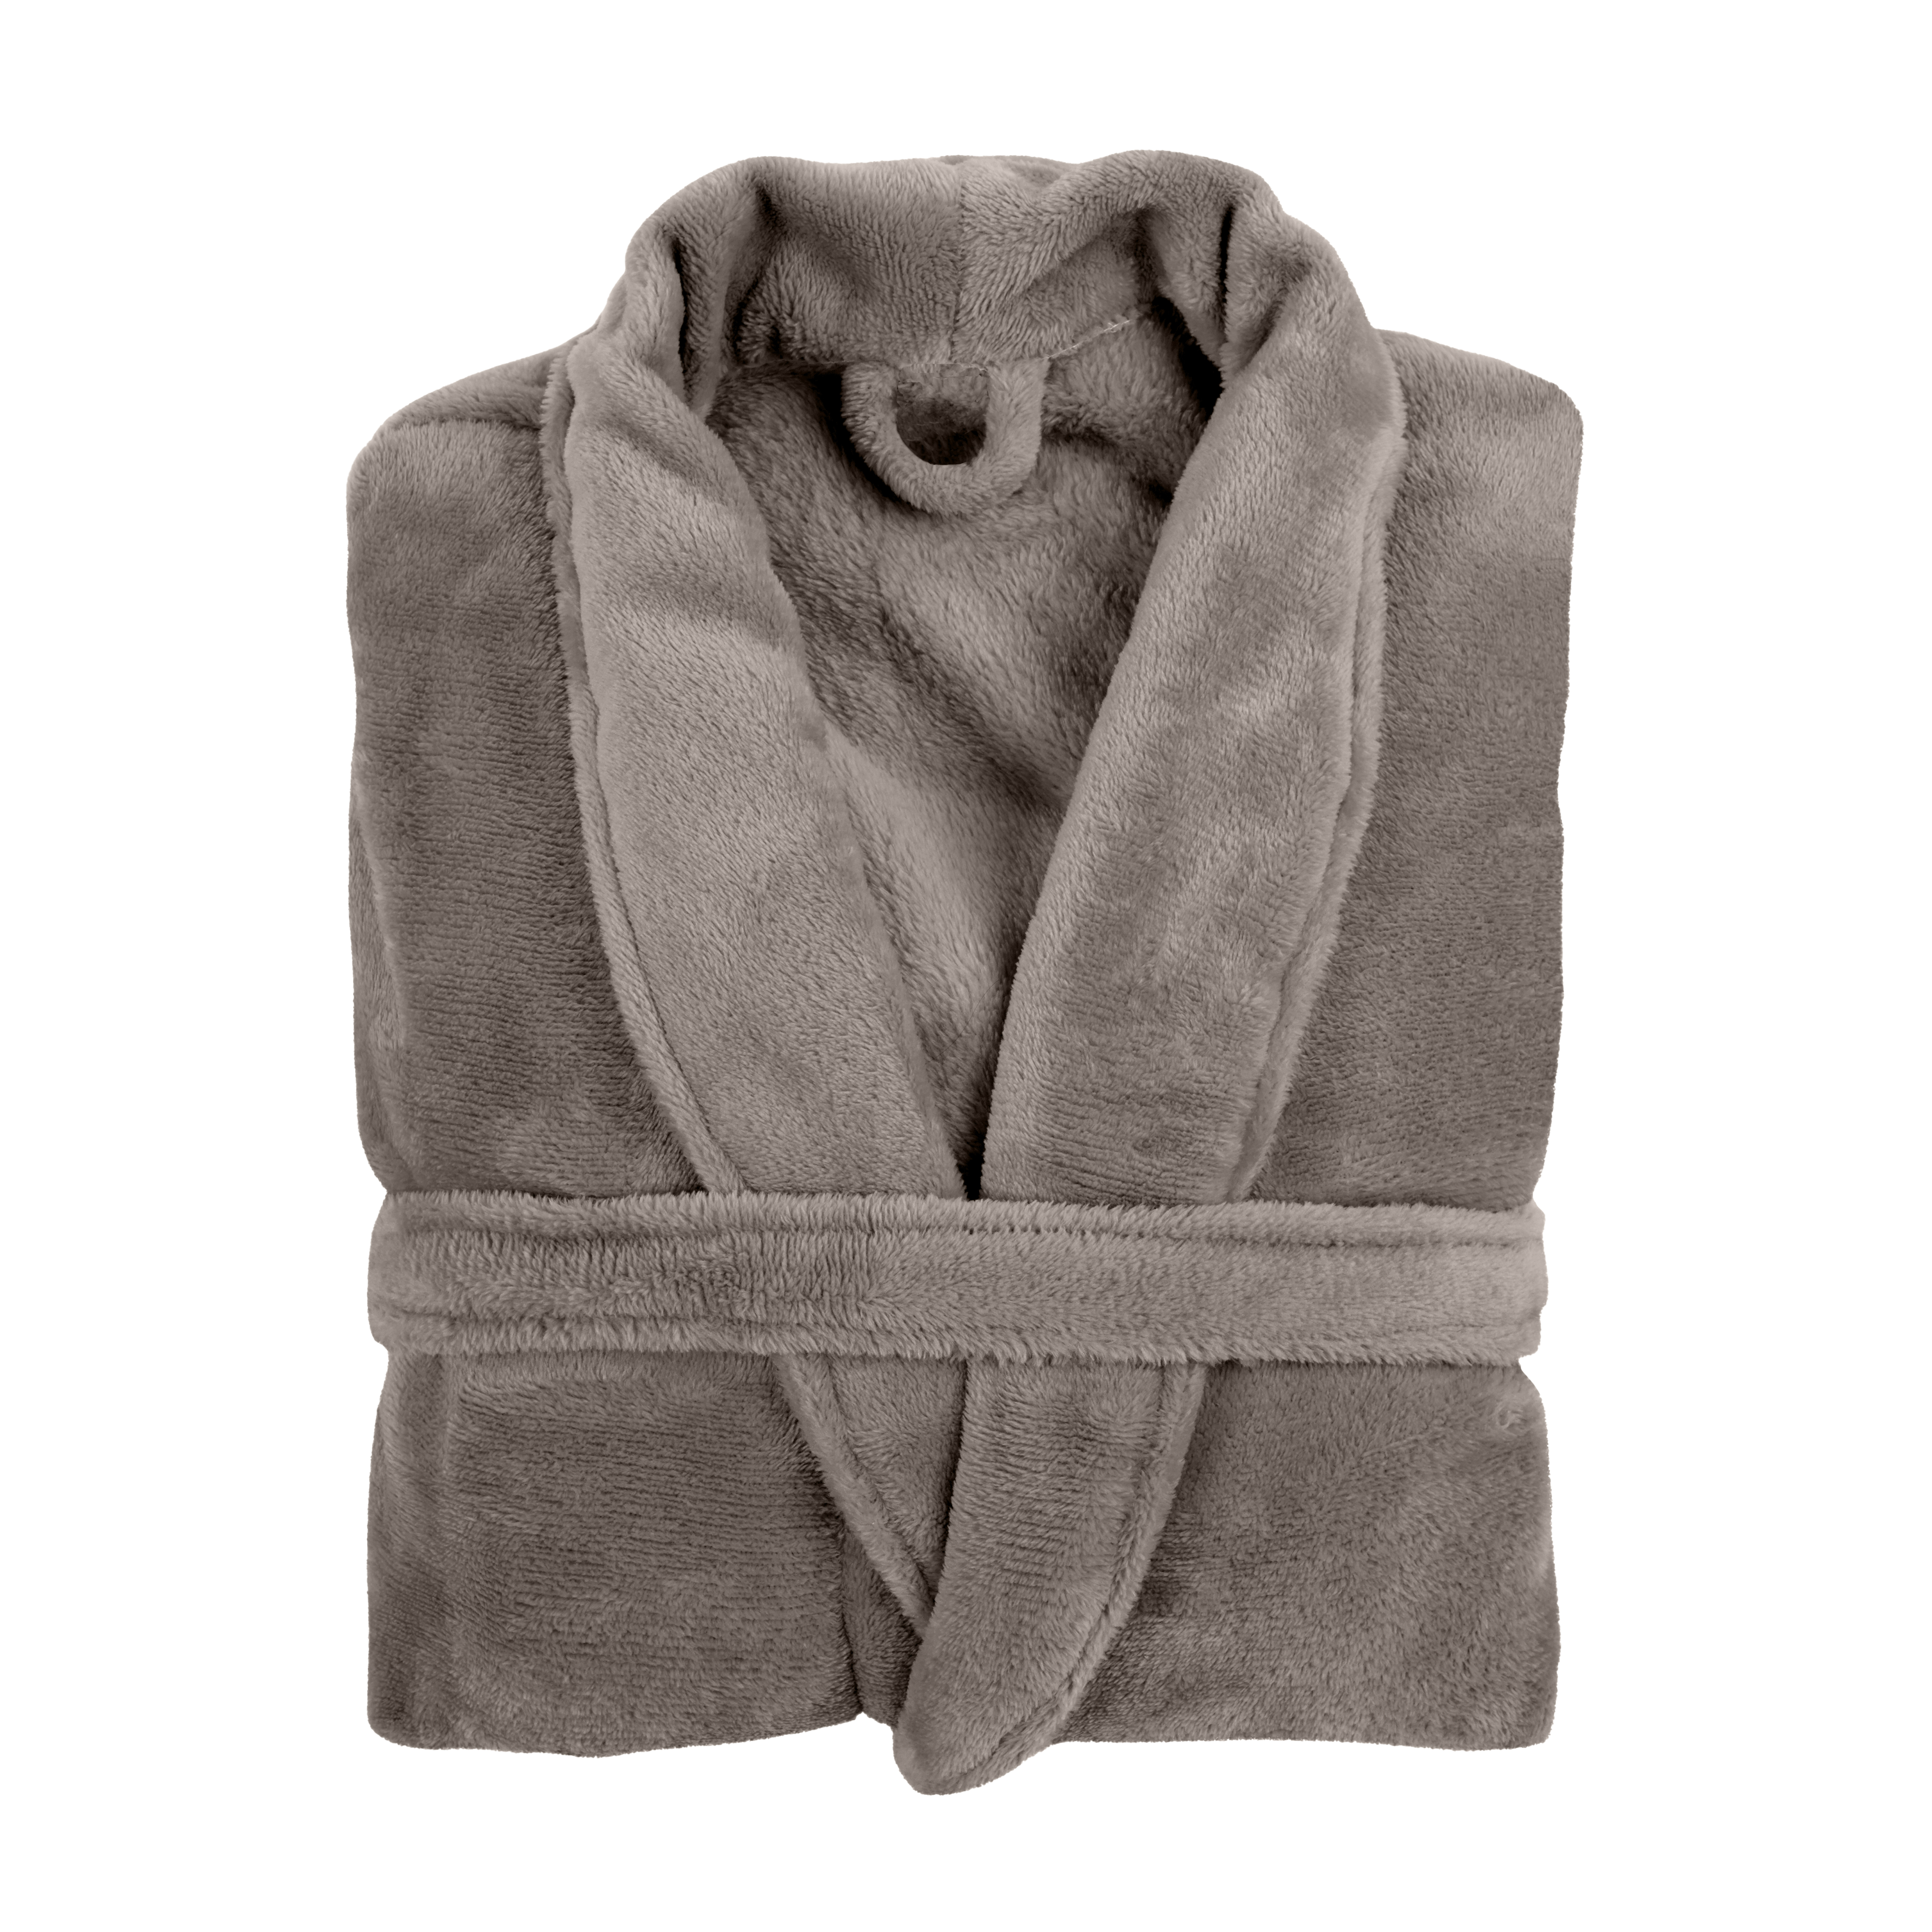 Badjas COSY microflannel- S/M - unisex, taupe